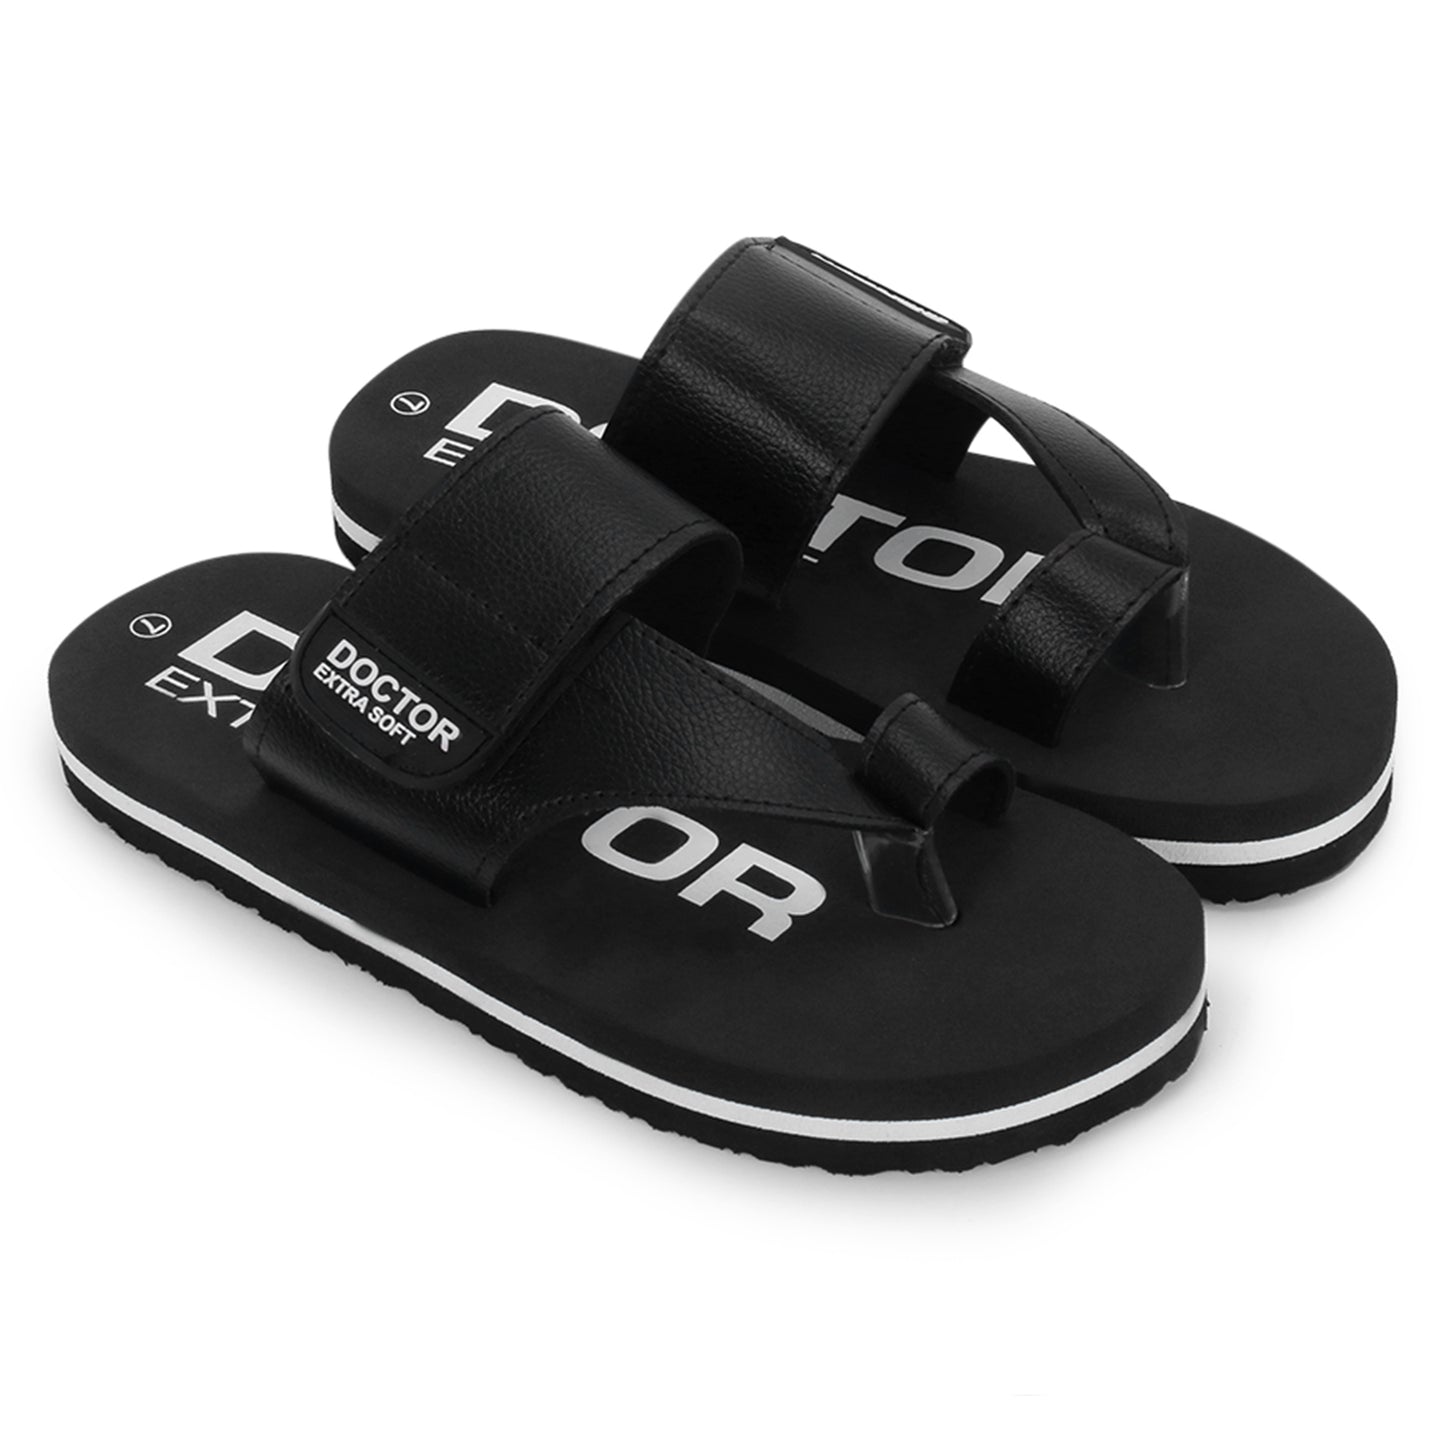 DOCTOR EXTRA SOFT D-26 One Toe Slippers for Men Ortho Care Orthopaedic Diabetic Dr Stylish House Flip-Flop & Thump Ring Slip on for Gents-Boys